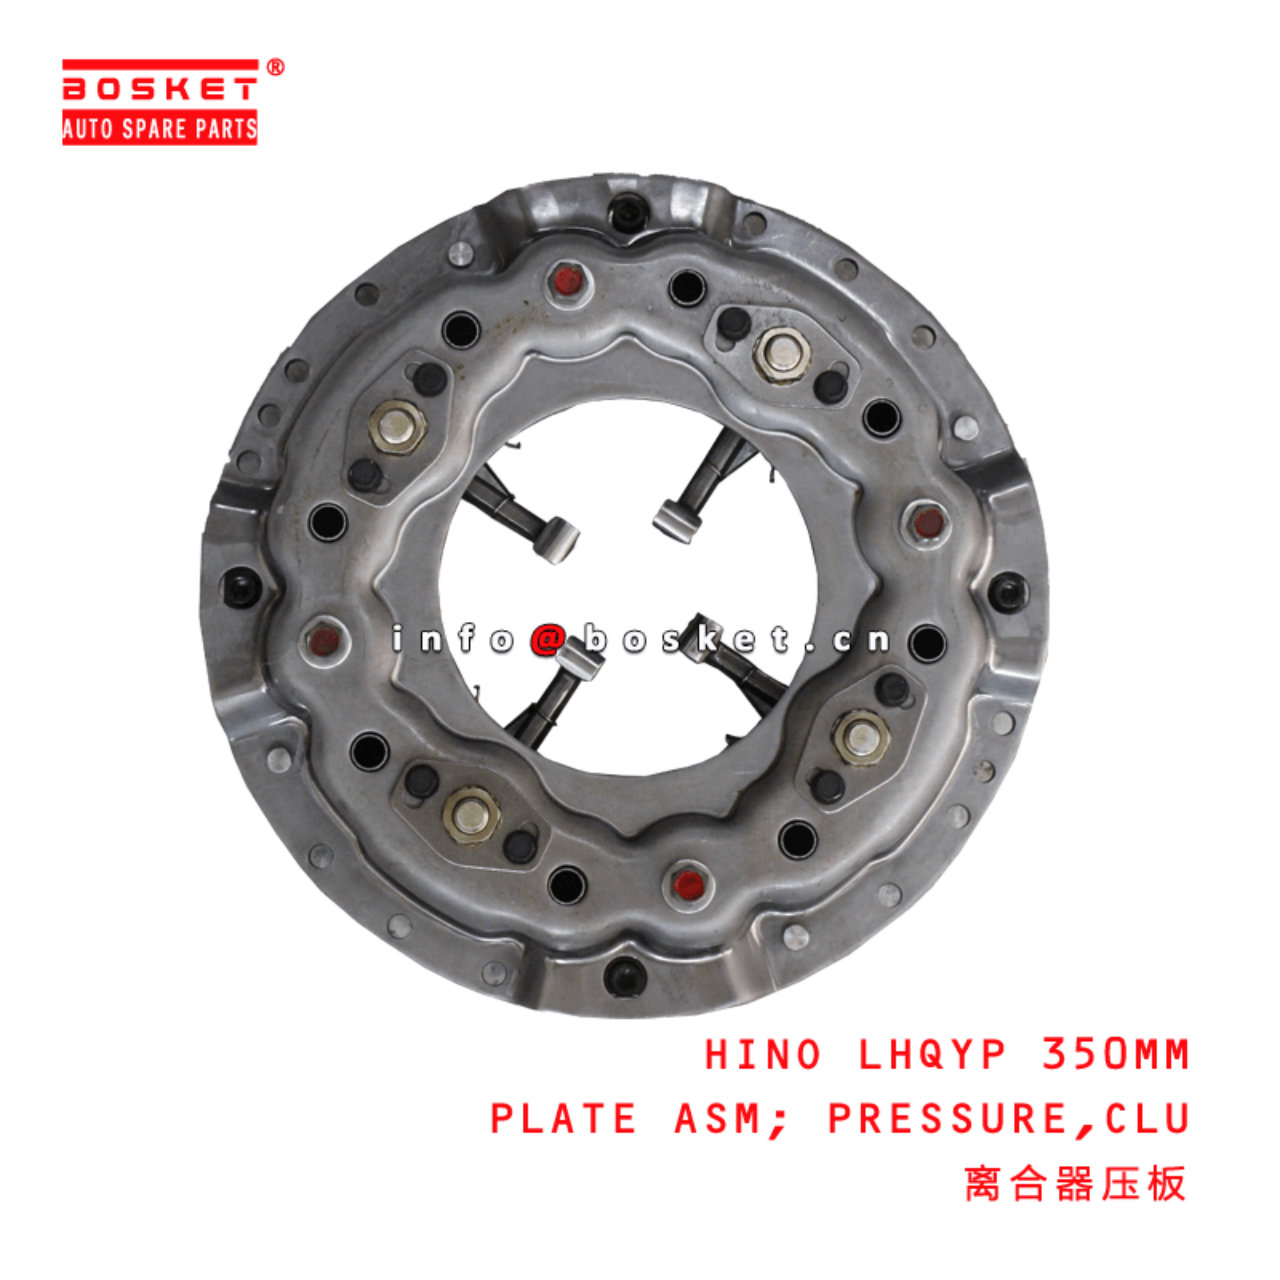  HINO LHQYP 350MM Clutch Pressure Plate Assembly Suitable For HINO 